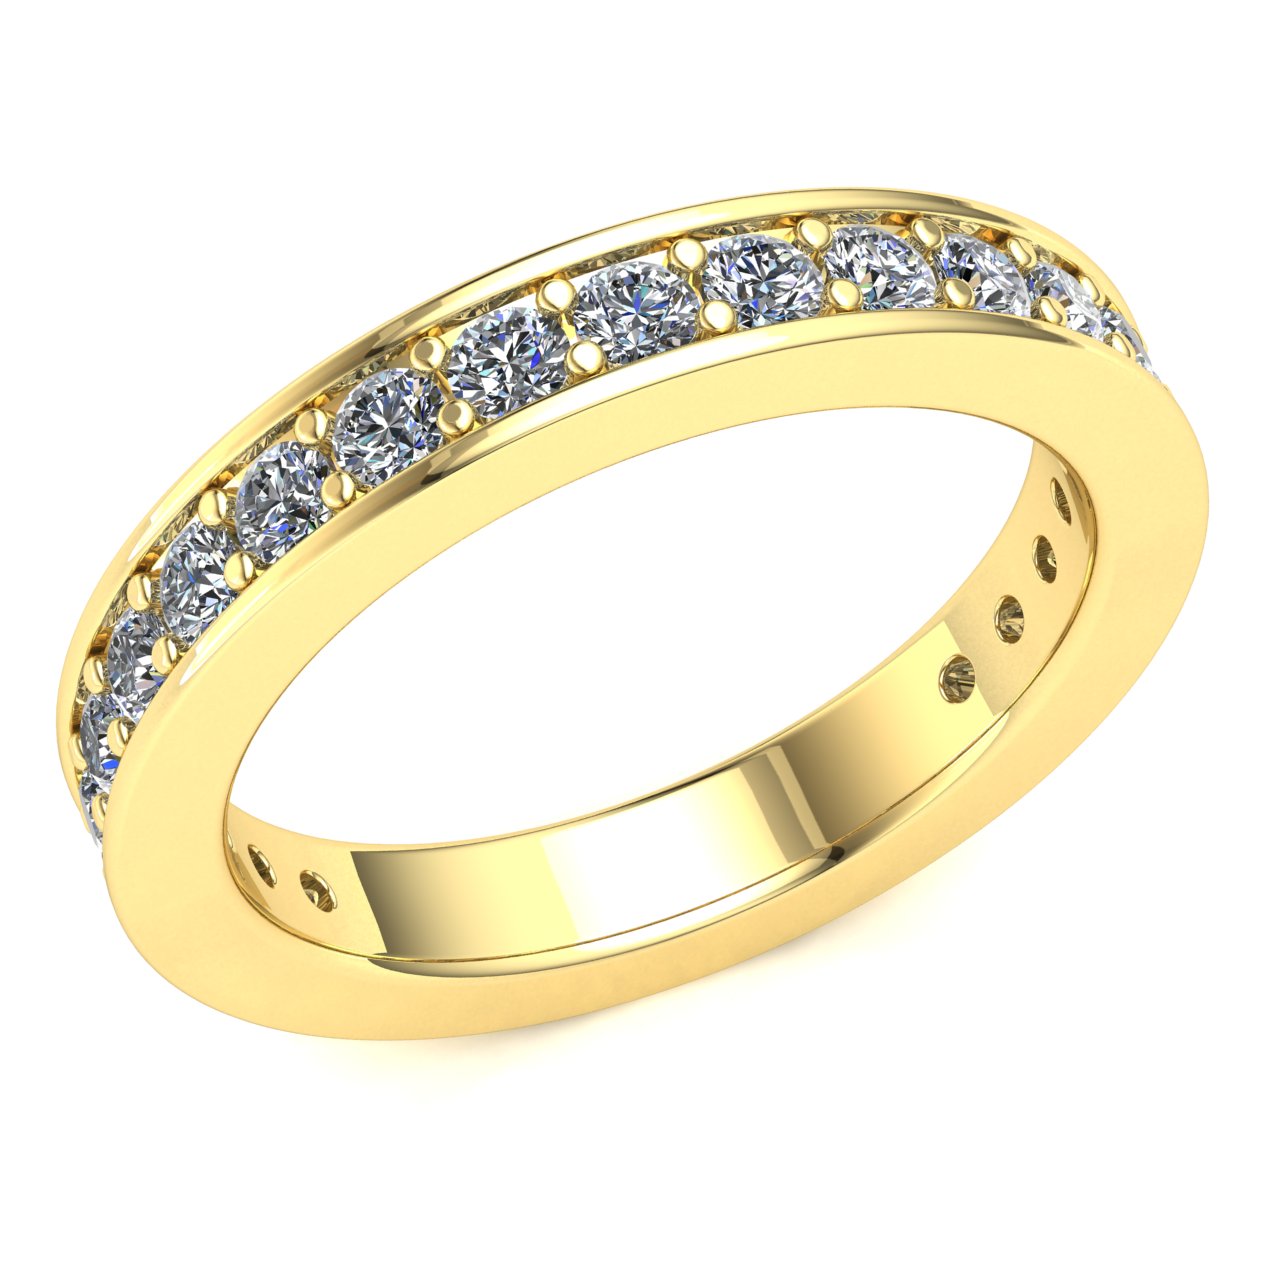 Jewel We Sell 1.05ctw Round Brilliant Cut Diamond Ladies  Classic Eternity Band With Sizing Bar Ring 10k White, Yellow or Rose Gold JK I1